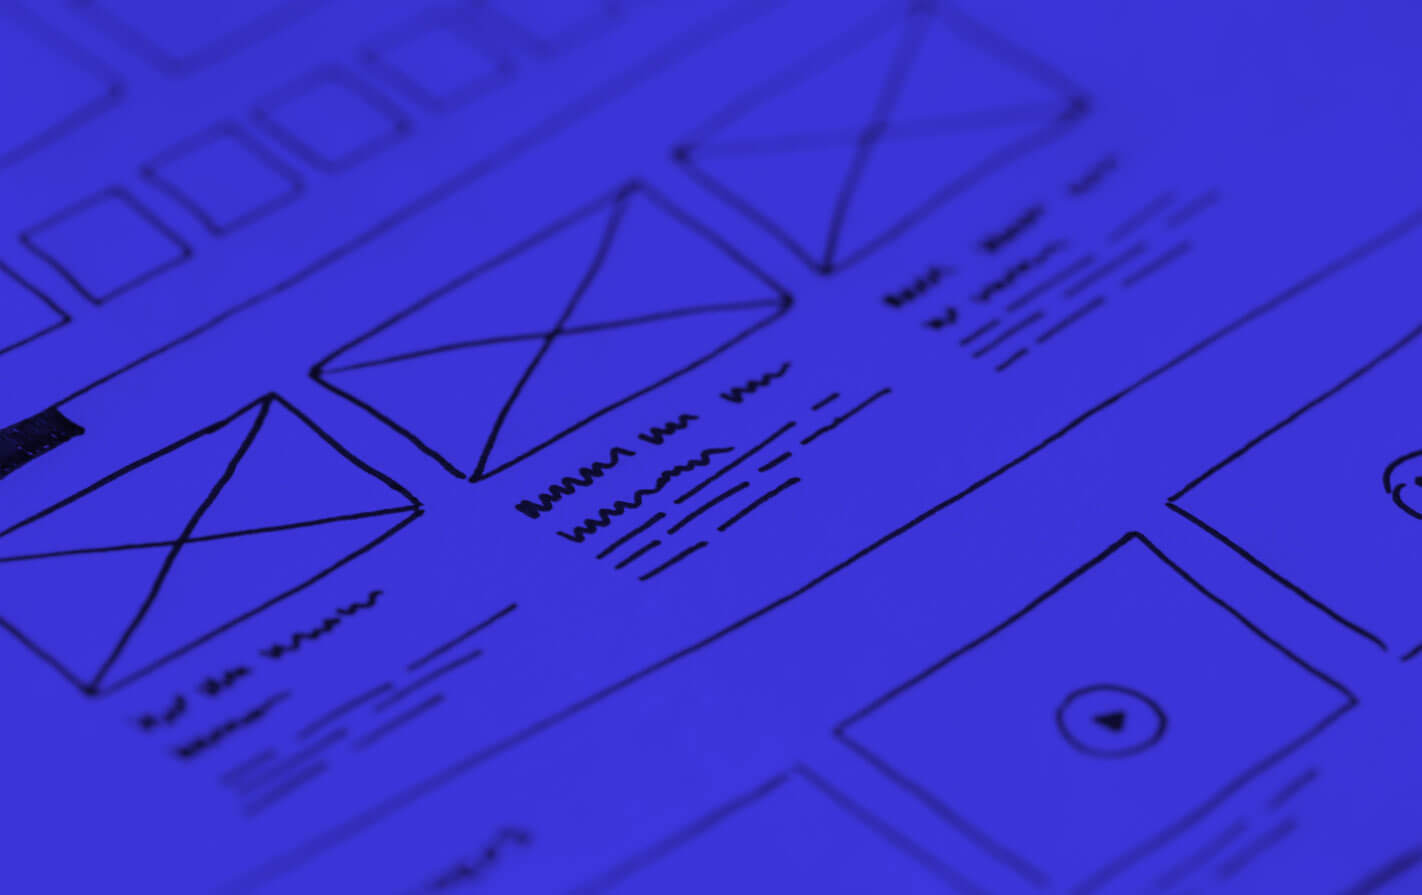 An illustrated wireframe image with a blue overlay